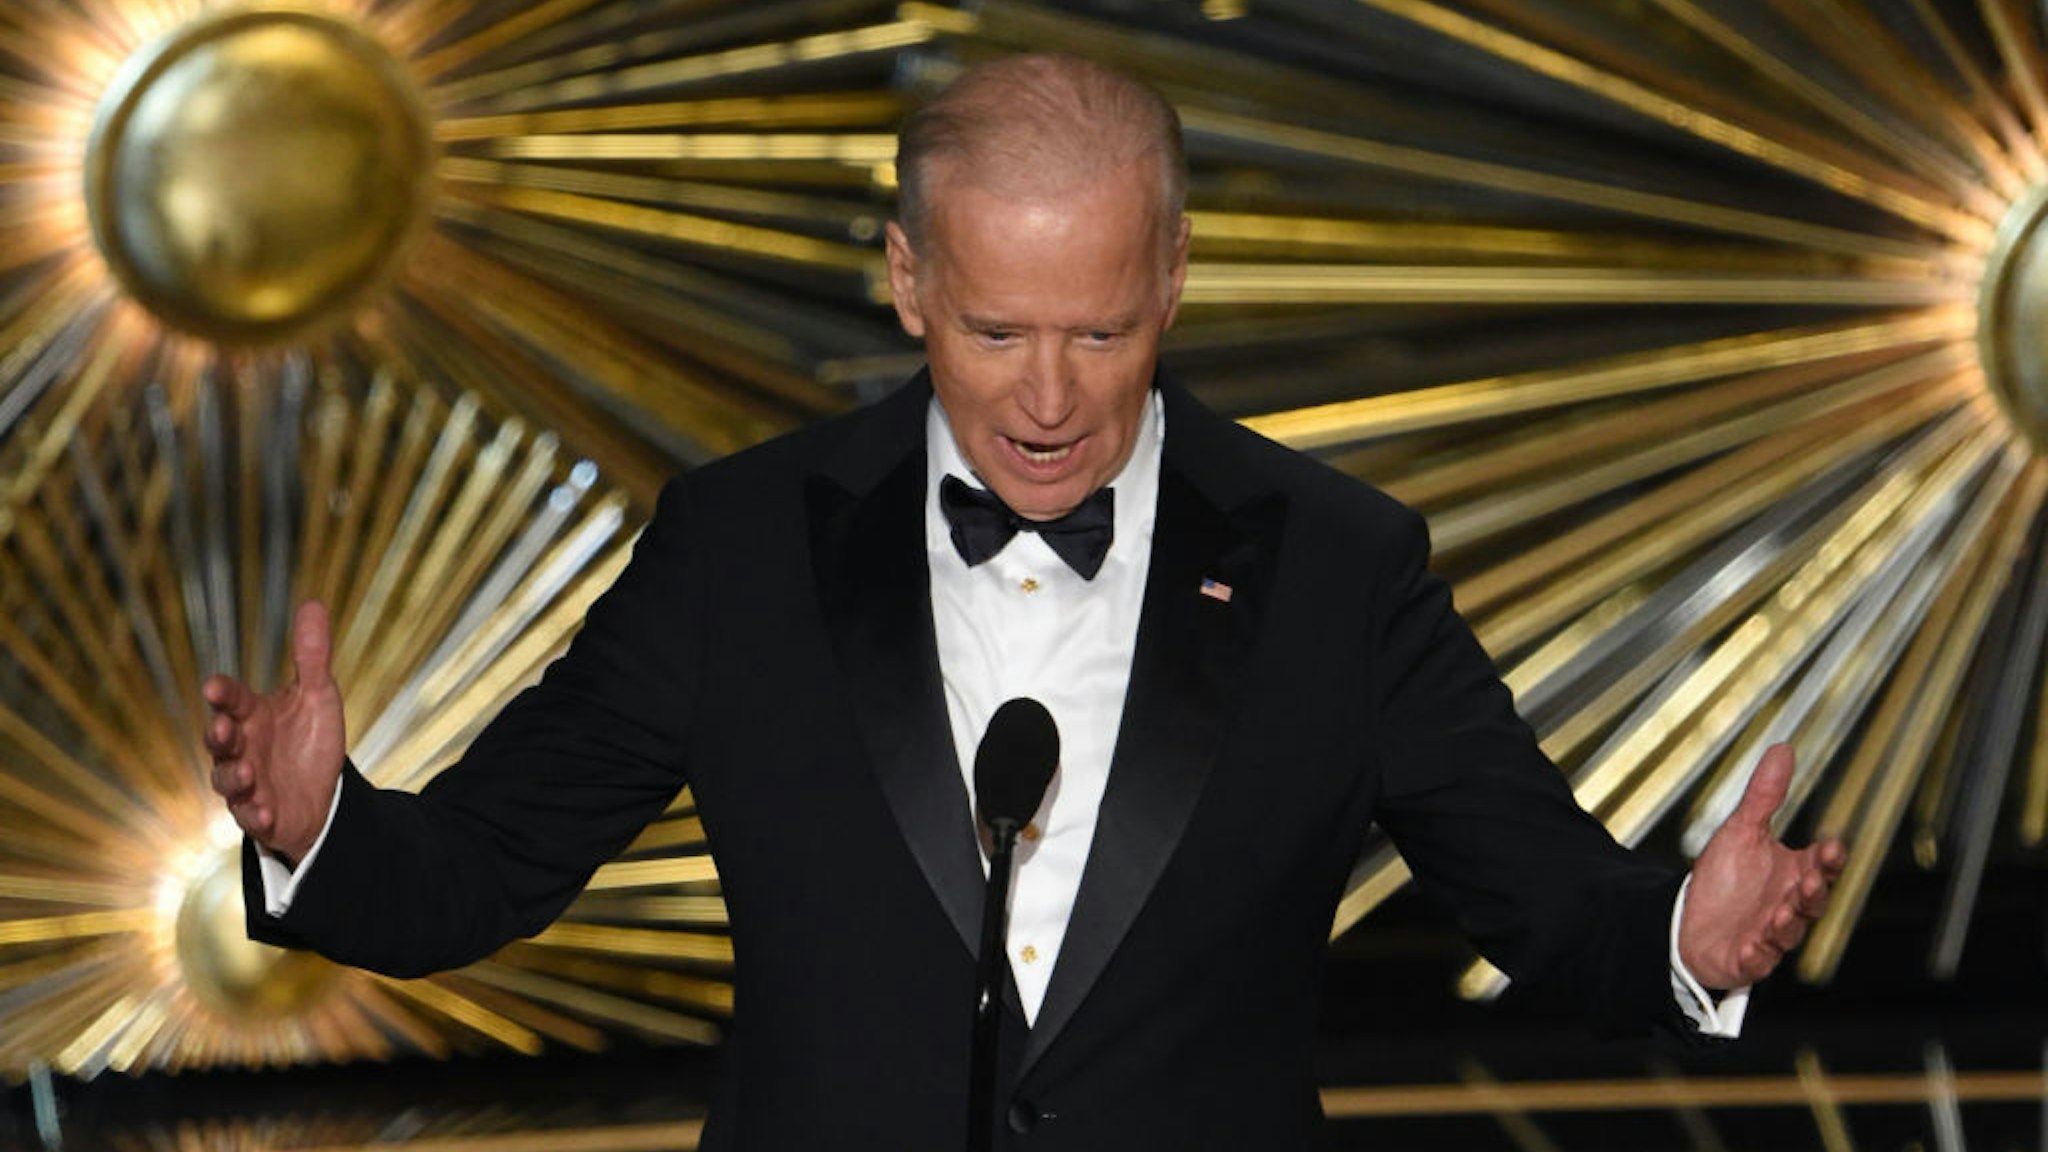 In this file photo US Vice President Joe Biden speaks on stage at the 88th Oscars on February 28, 2016 in Hollywood. - From Tom Hanks to Scarlett Johansson, Hollywood A-listers determined to see President Donald Trump defeated are badly split over the best Democratic candidate to back with their silver-screen dollars. (Photo by Mark RALSTON / AFP)